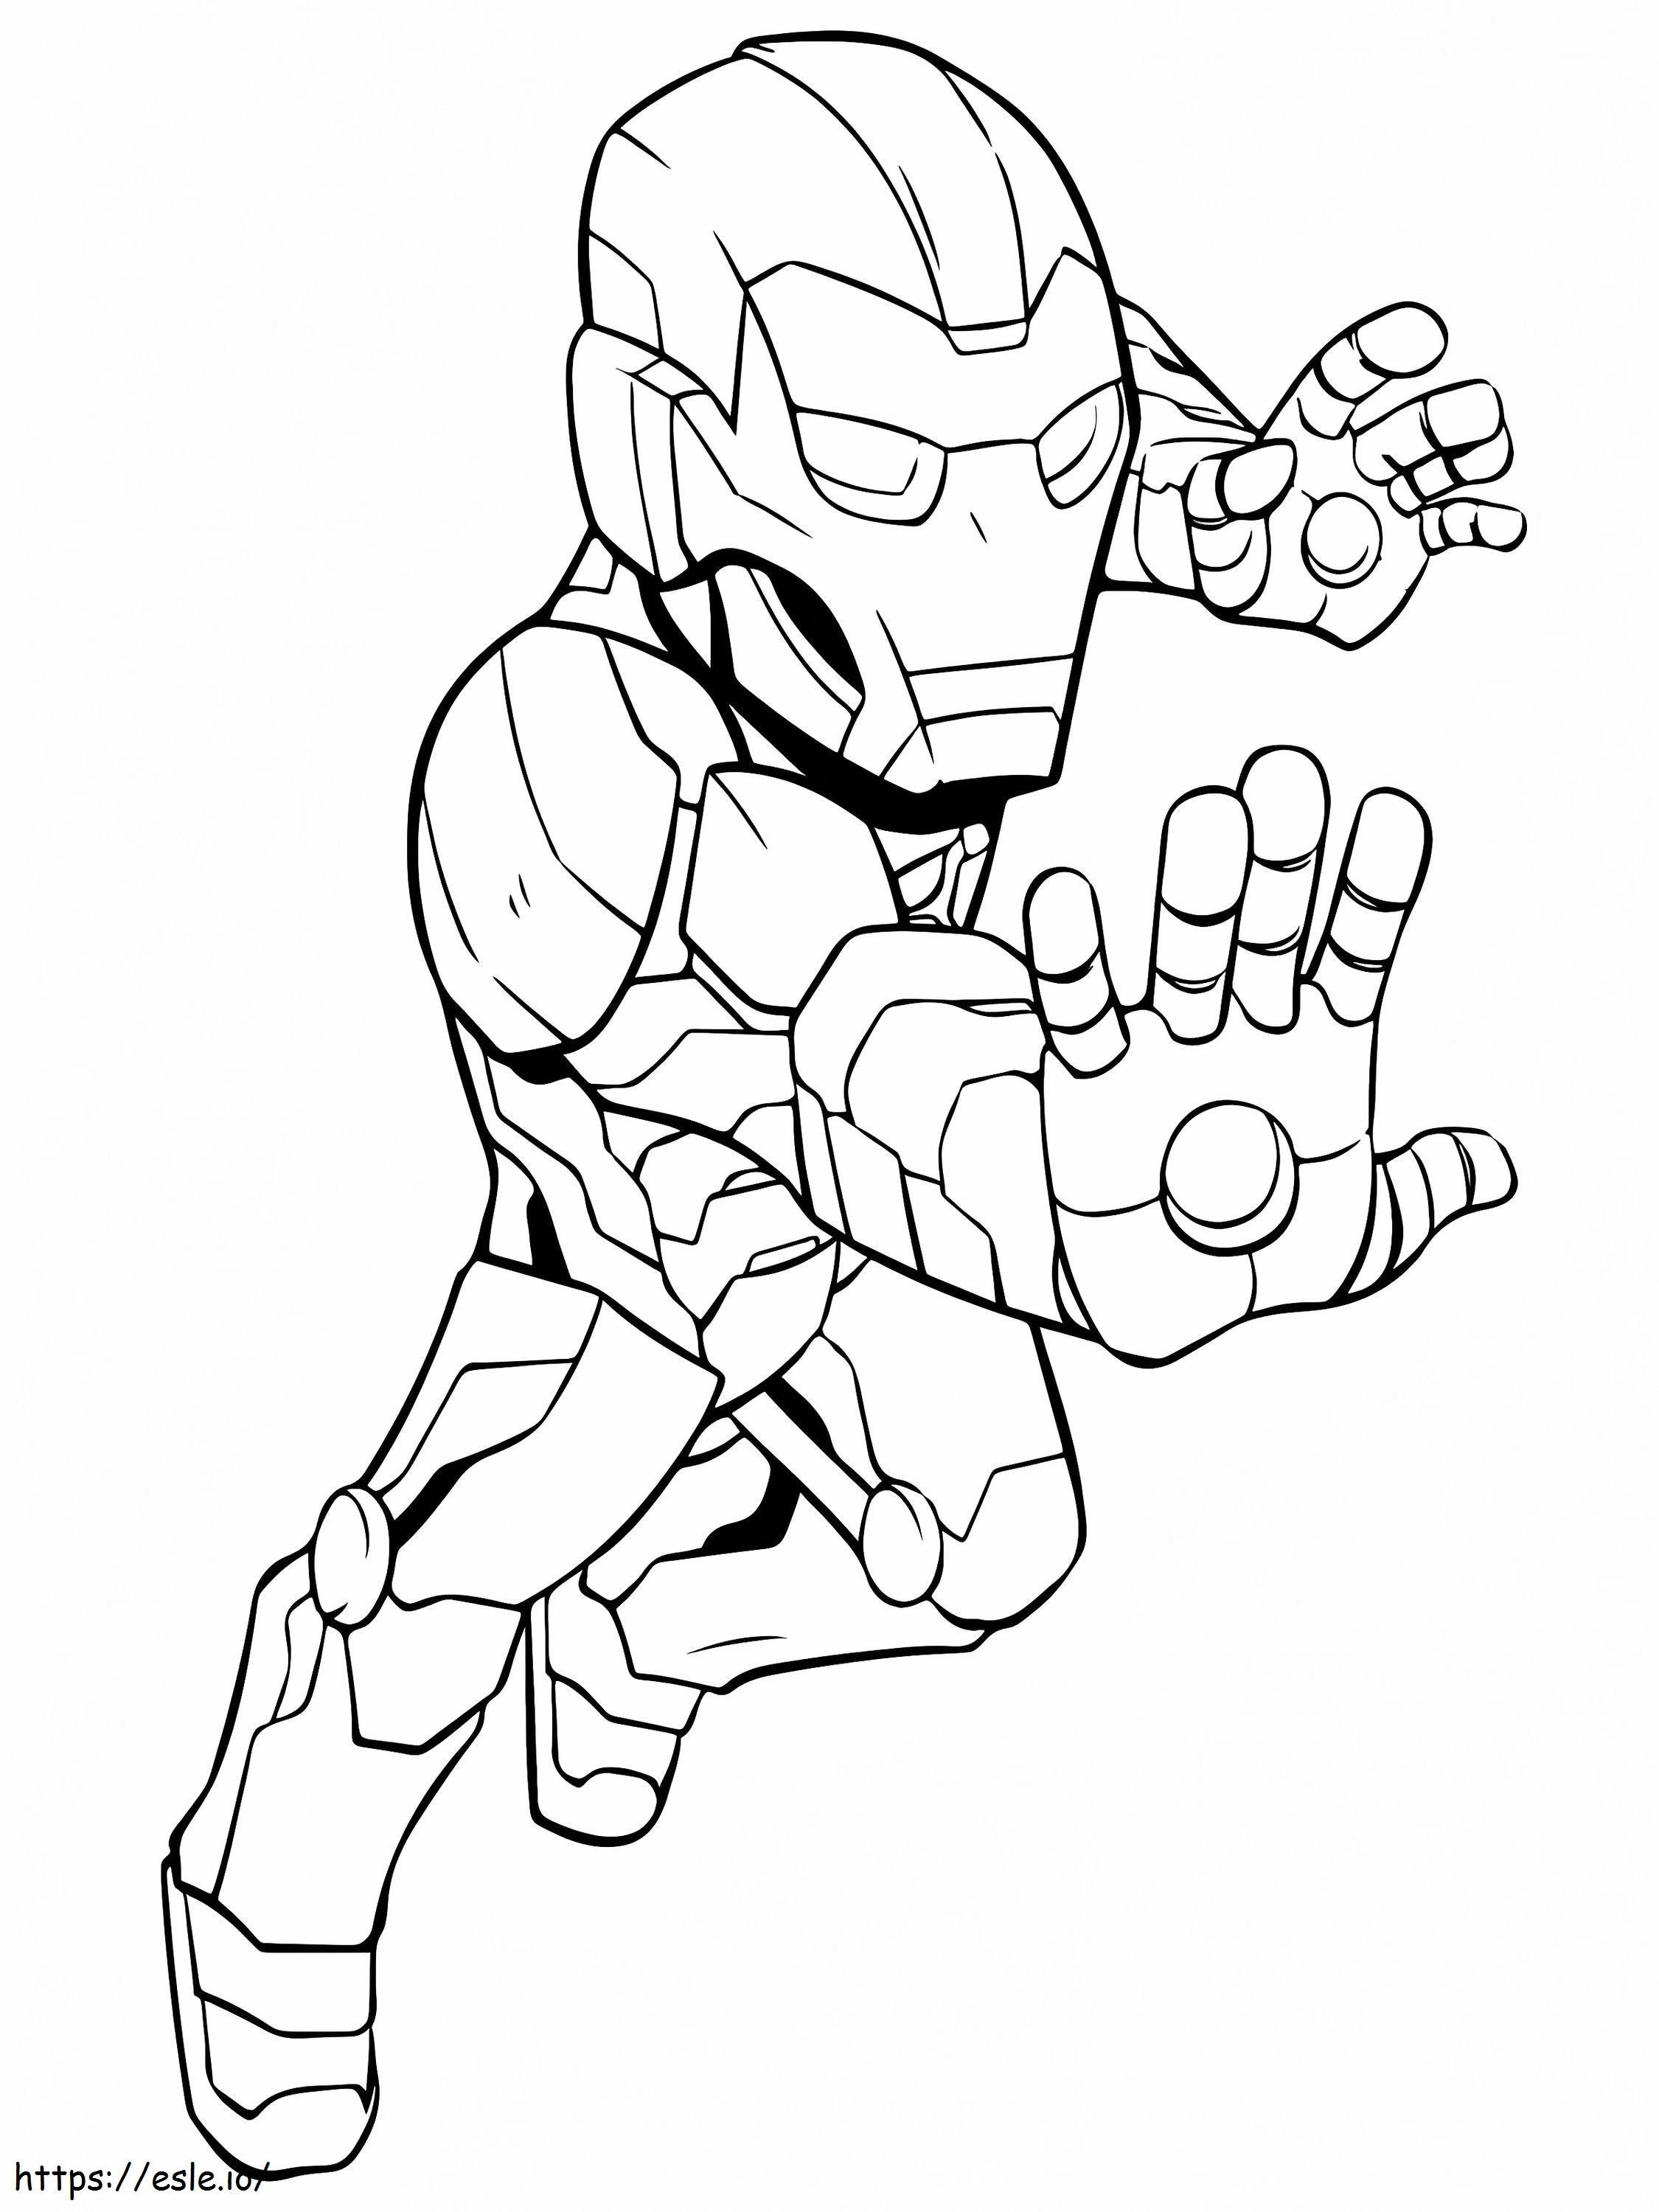 Iron Man Lego Avengers coloring page